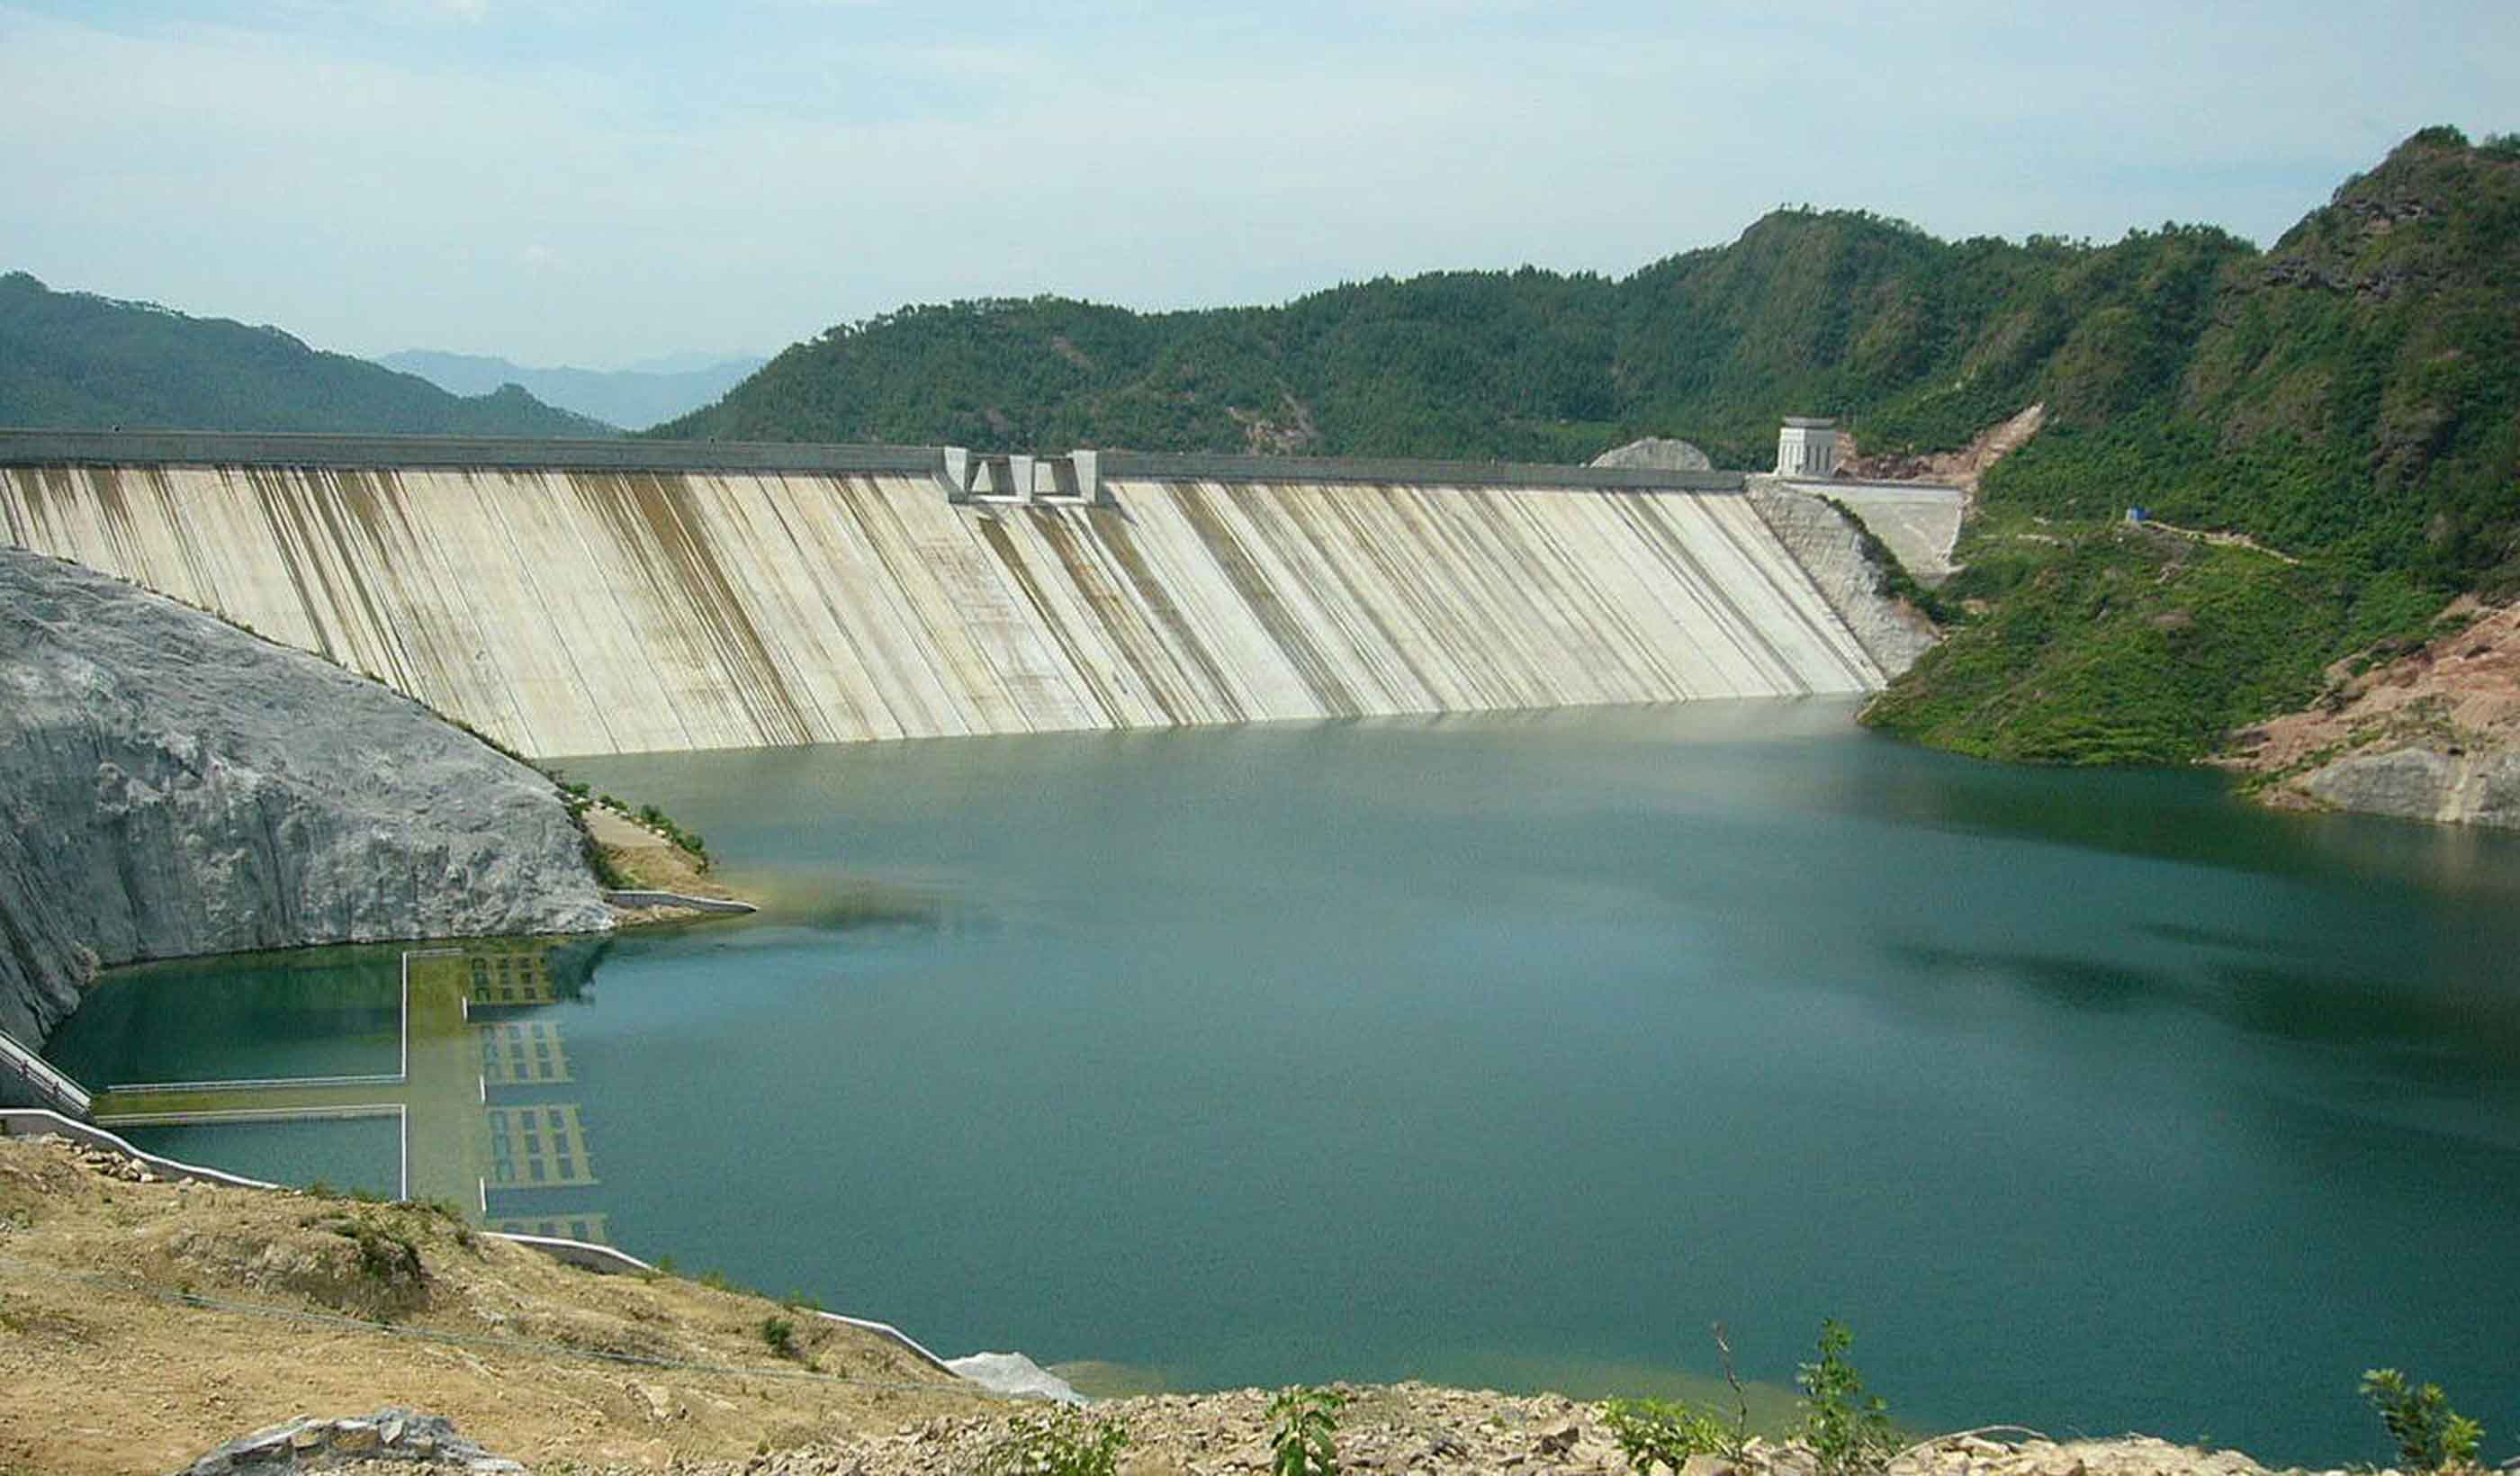 Tongbai Pumped Storage Hydropower Project